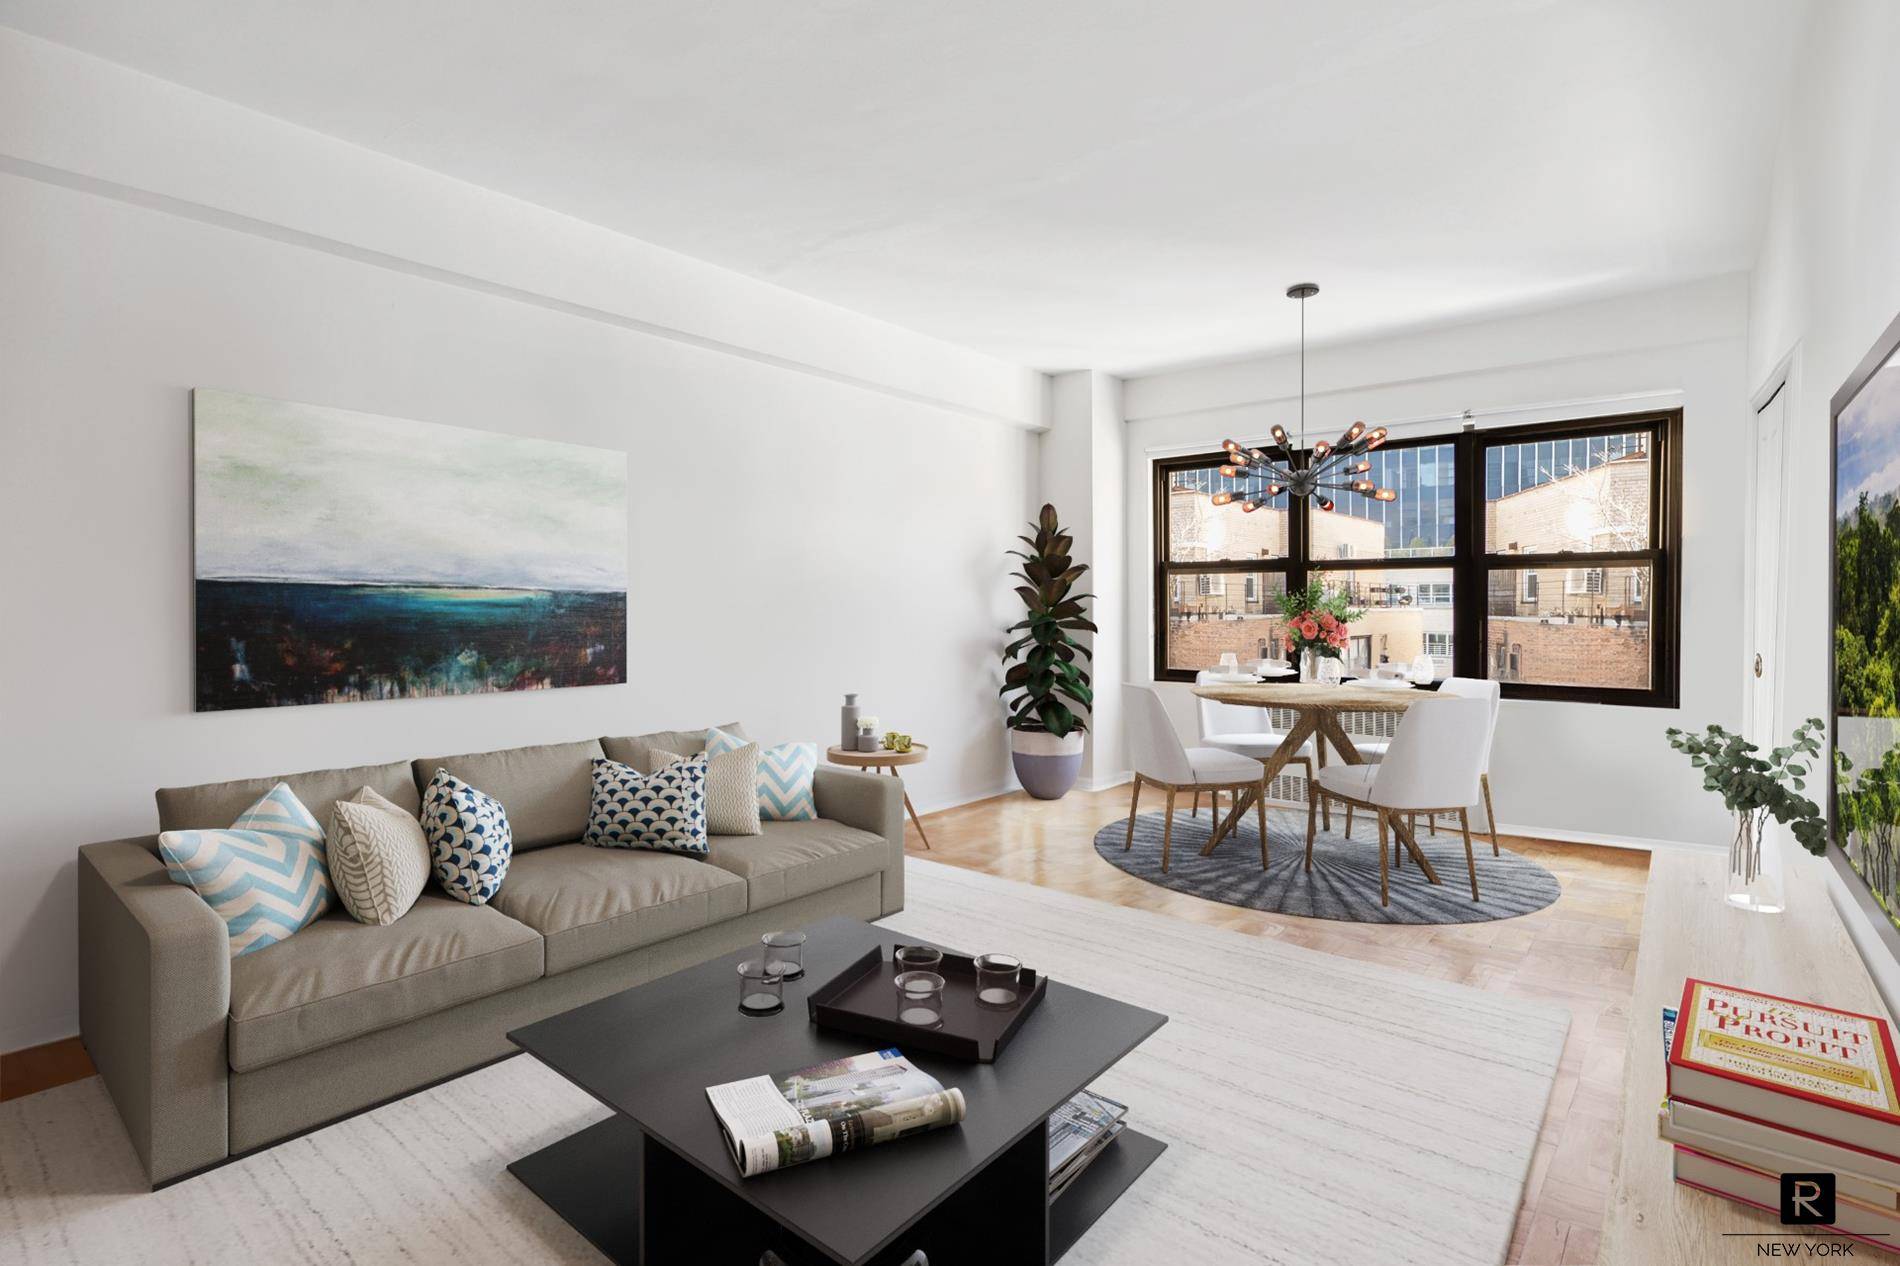 140 East 56th St. is a centrally located condo set in the heart of Midtown.